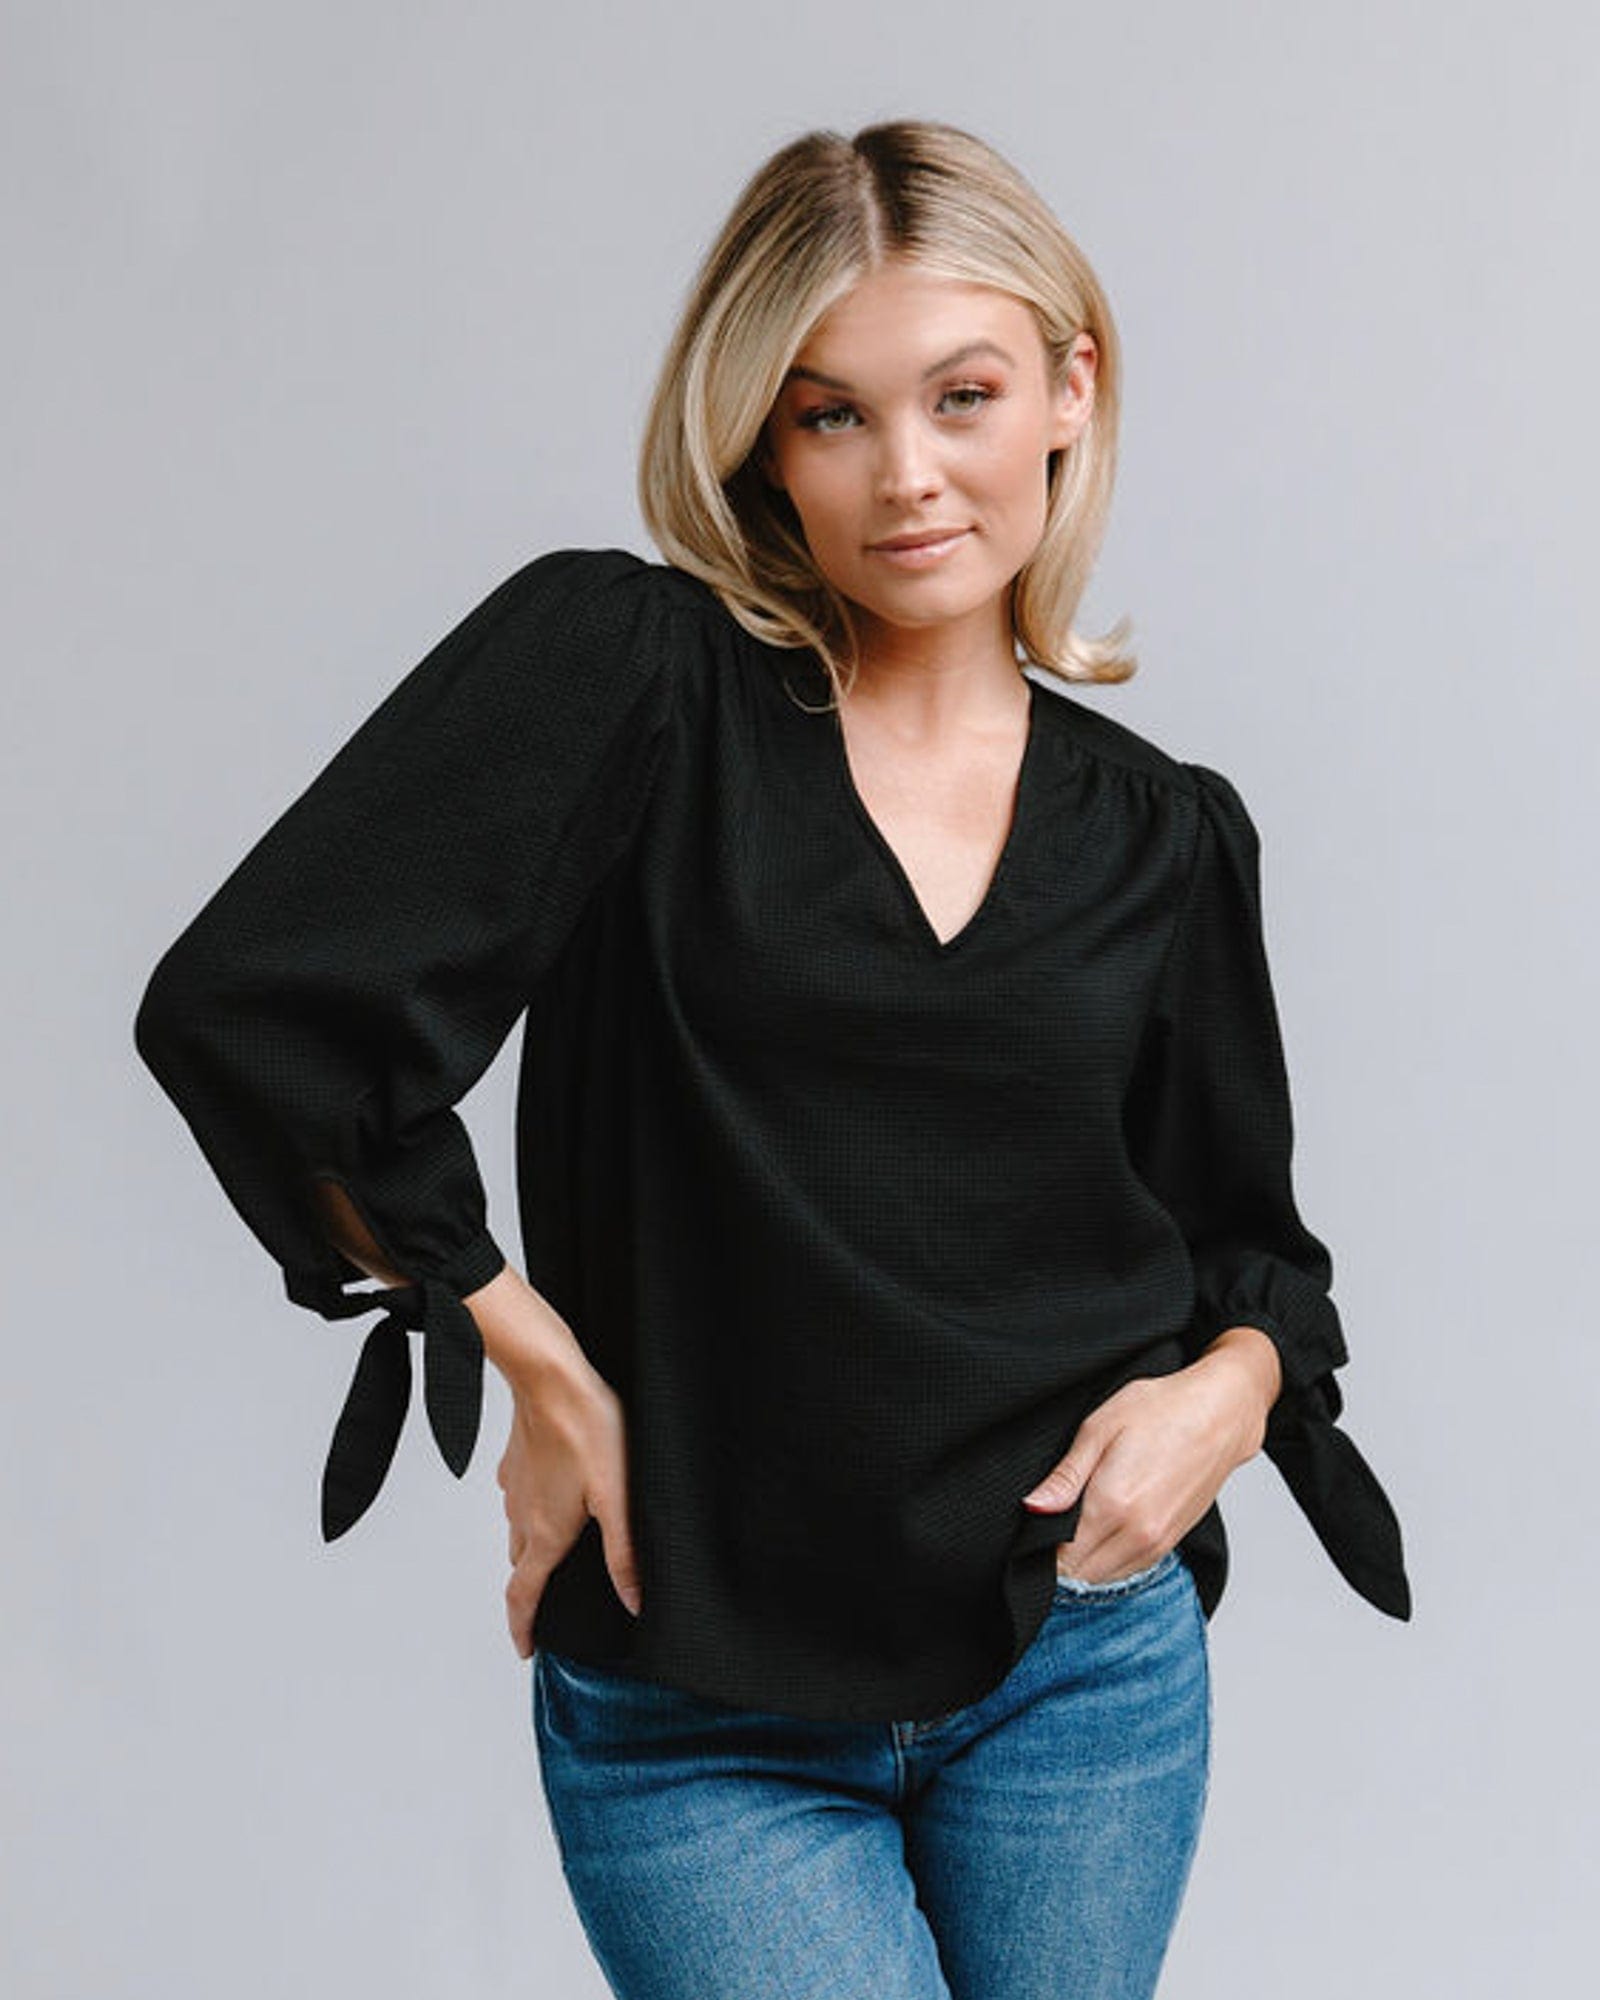 Woman in a long sleeve, v-neck, black blouse